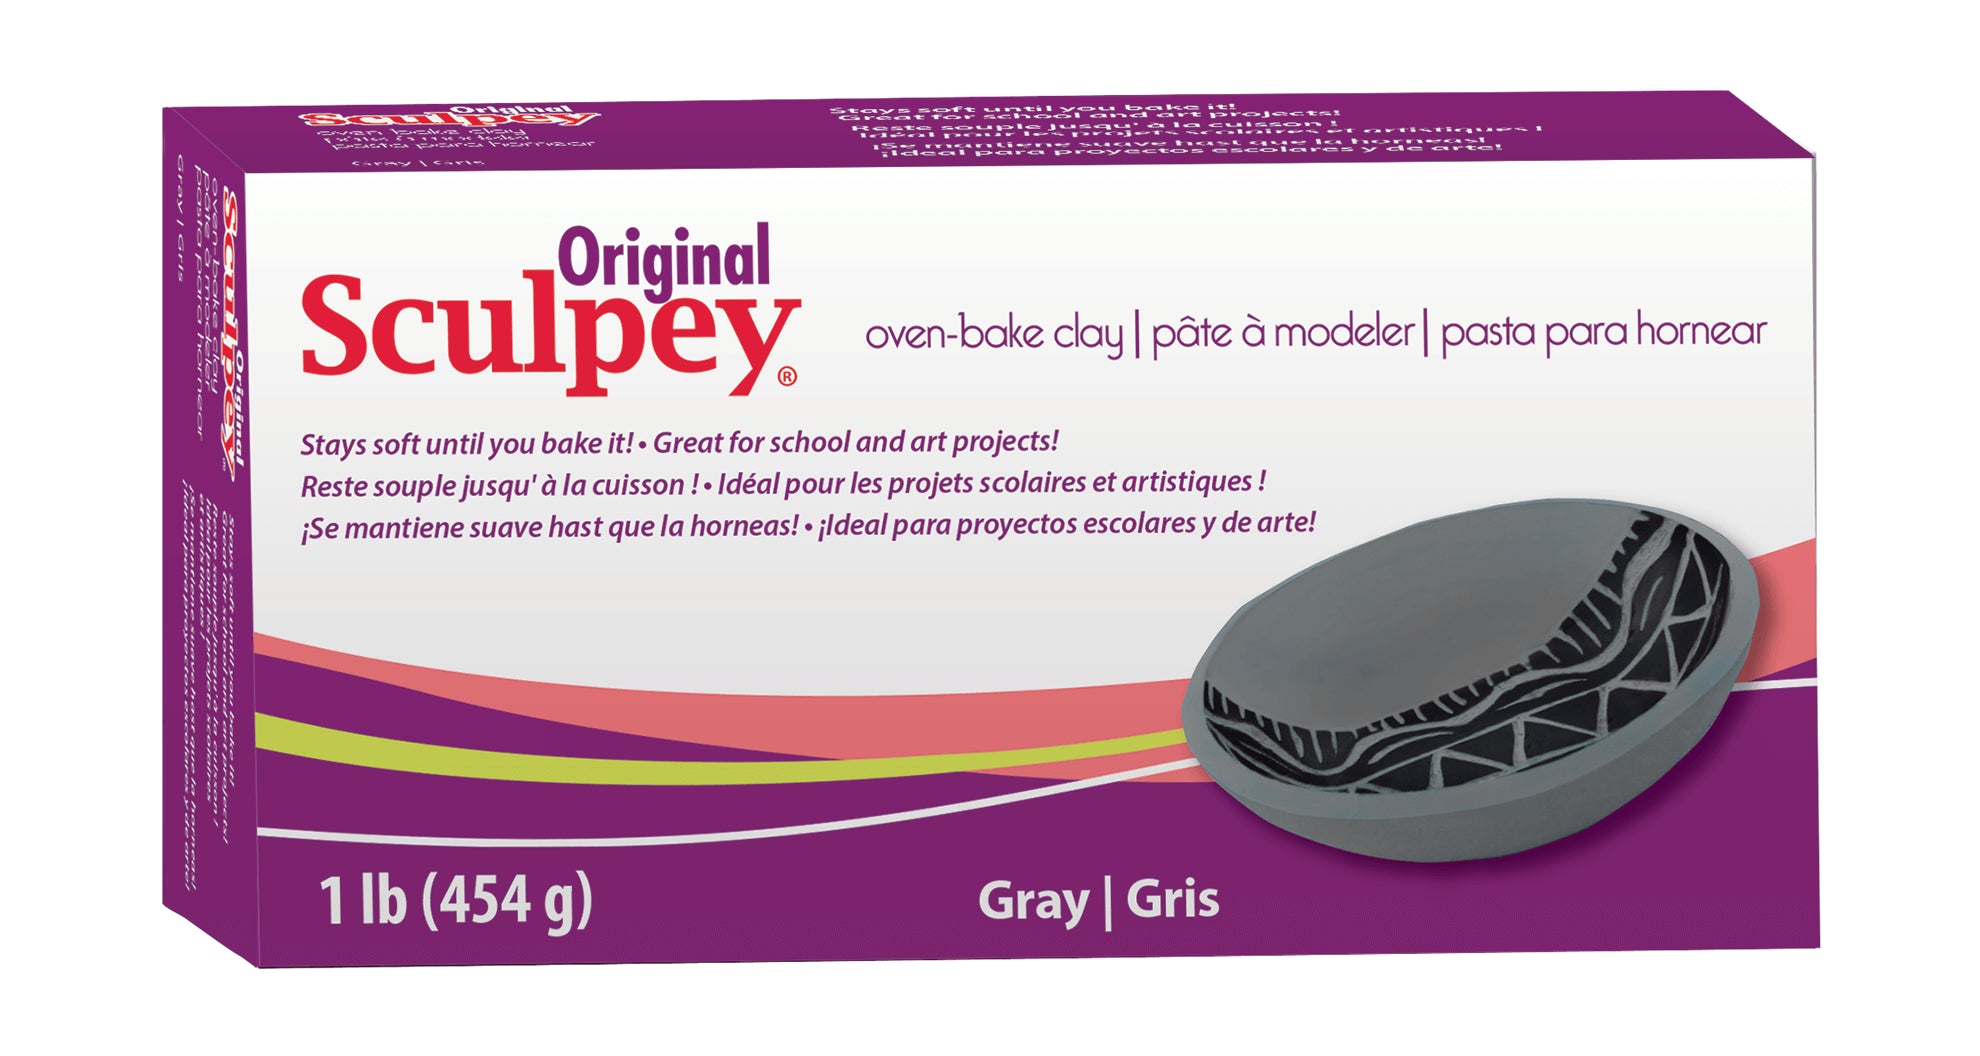 Sculpey Original Sculpey Oven-Baked Polymer Clay 8lb White